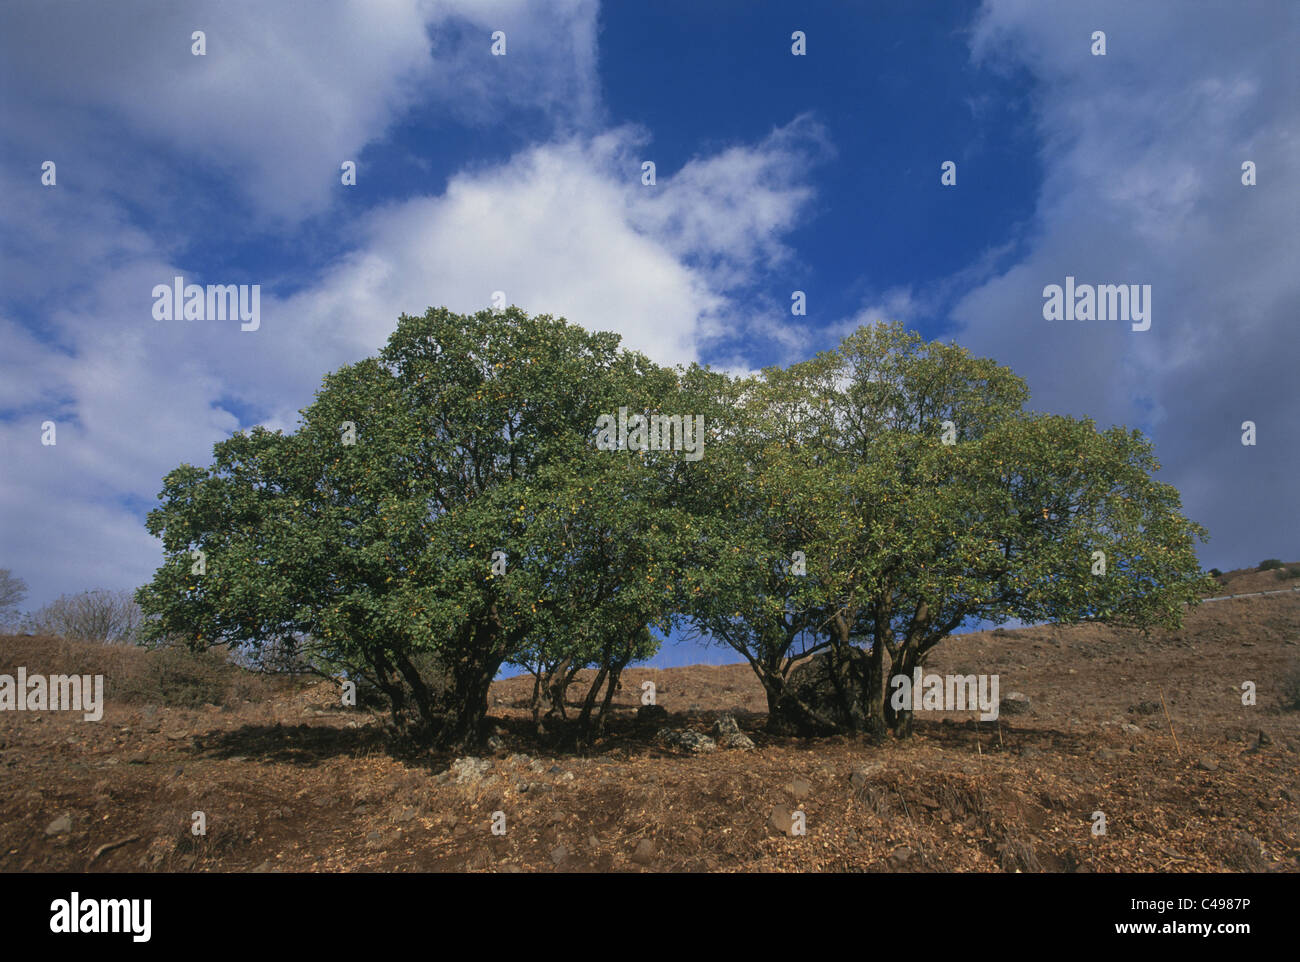 Abstract view of two trees in an open field in the Golan Heights Stock Photo